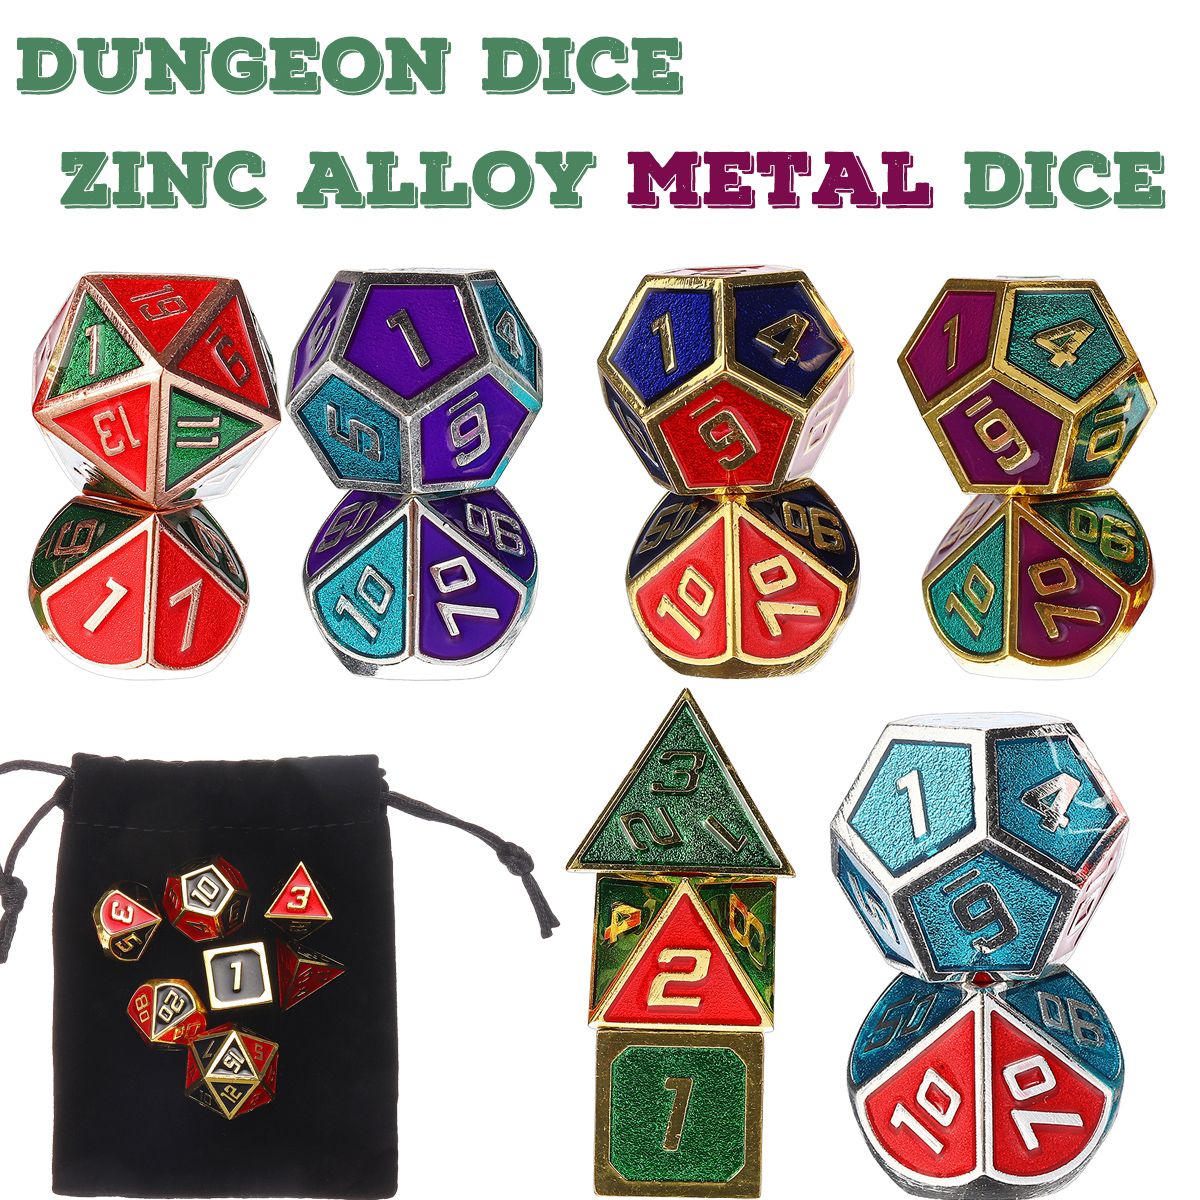 7Pcs-Metal-Polyhedral-Dices-Set-Role-Playing-D-amp-D-Dungeons-and-Dragons-Dice-Party-Table-Games-wit-1587884